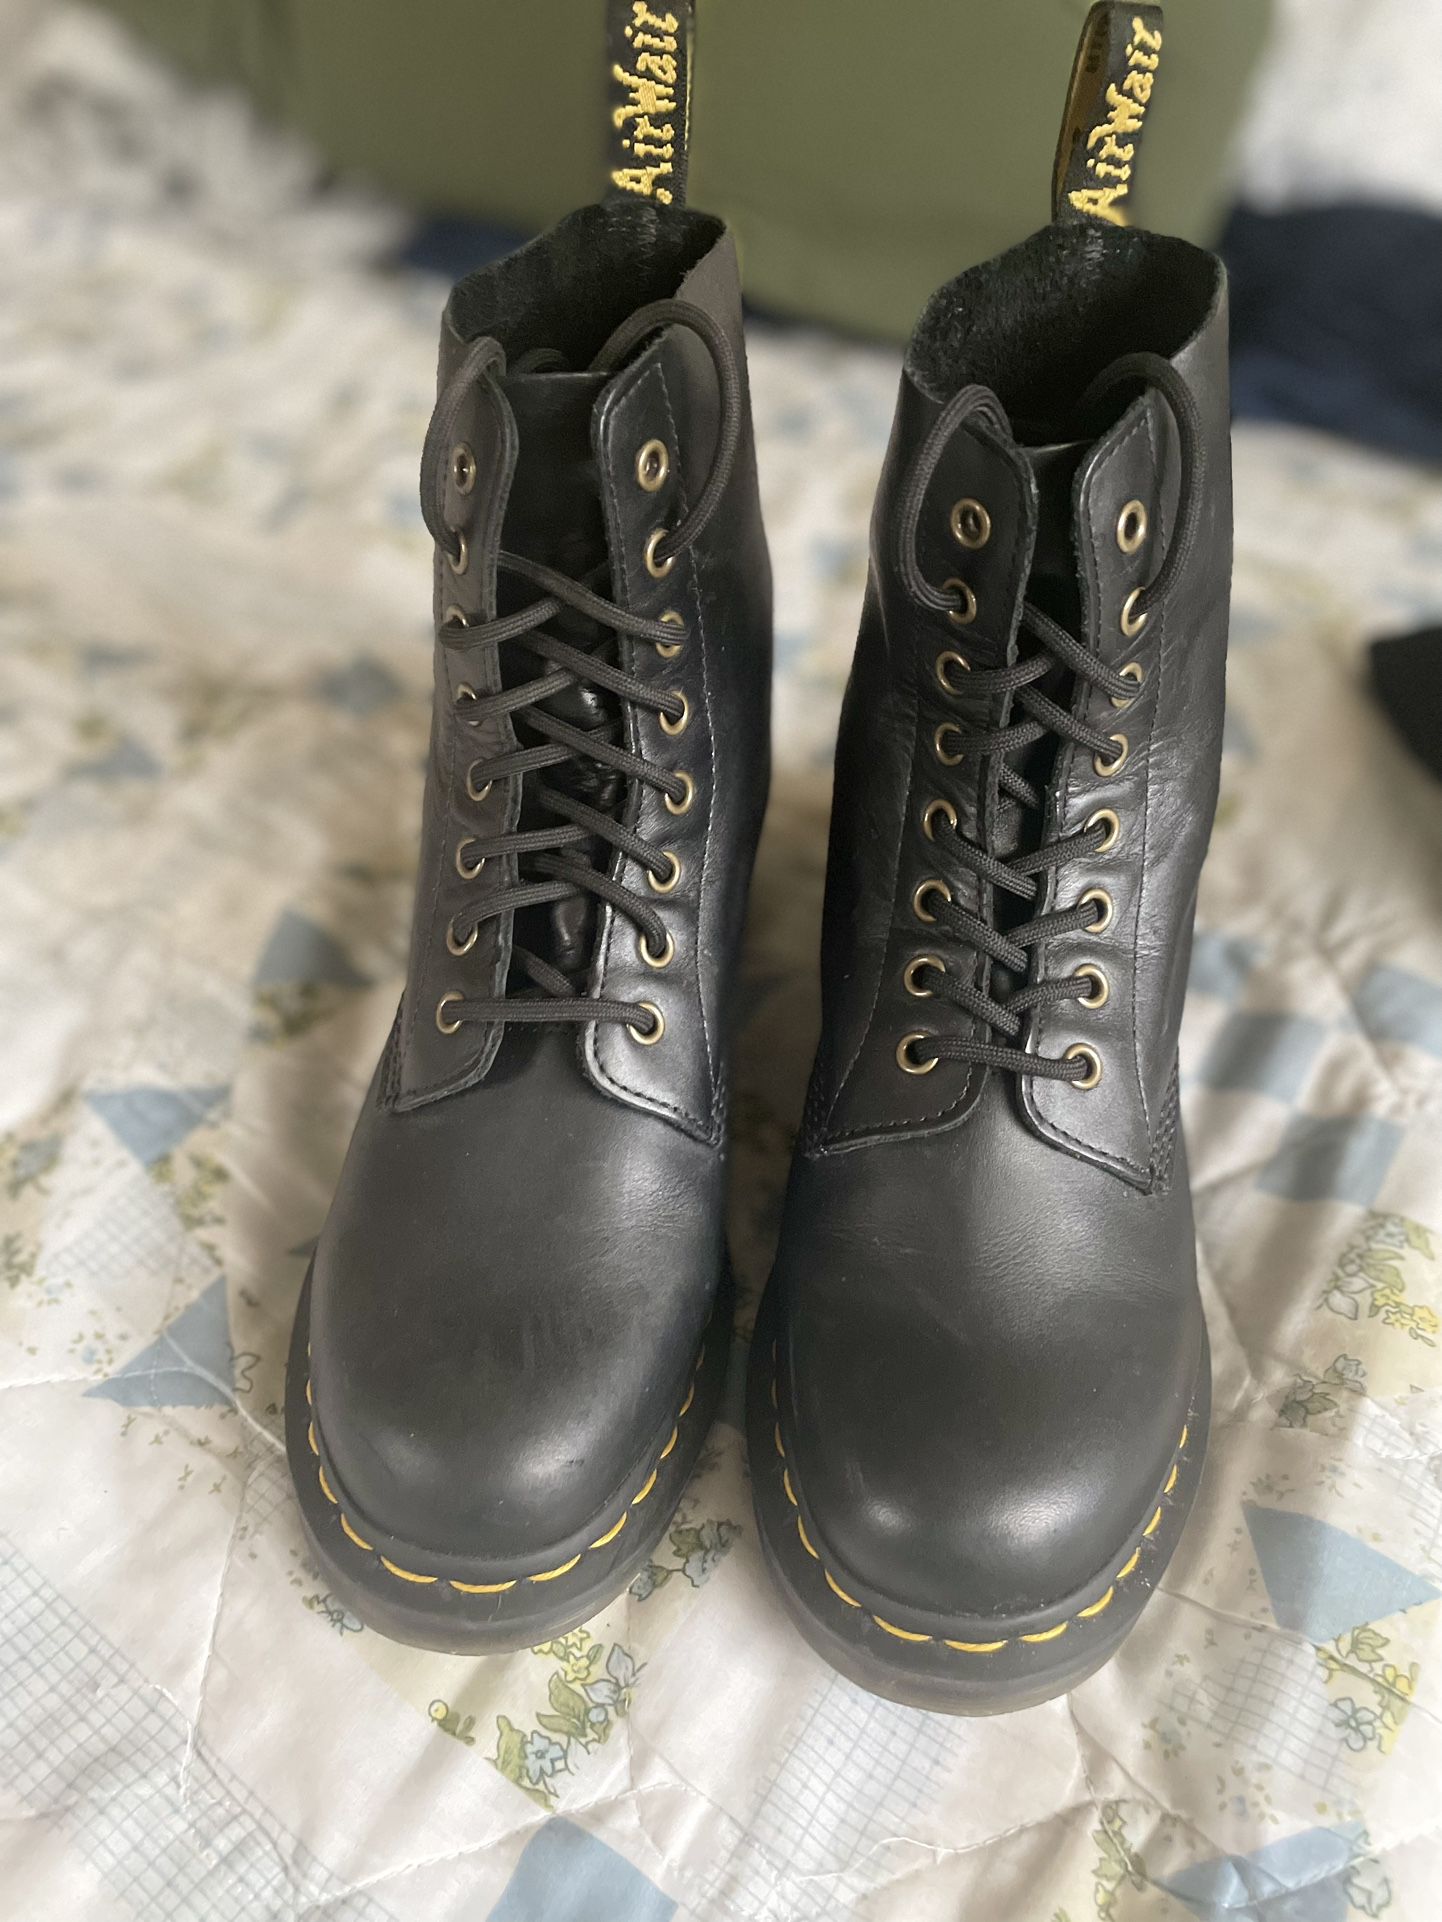 Martens Airwair With Bouncing for Sale in Buffalo Grove, IL - OfferUp